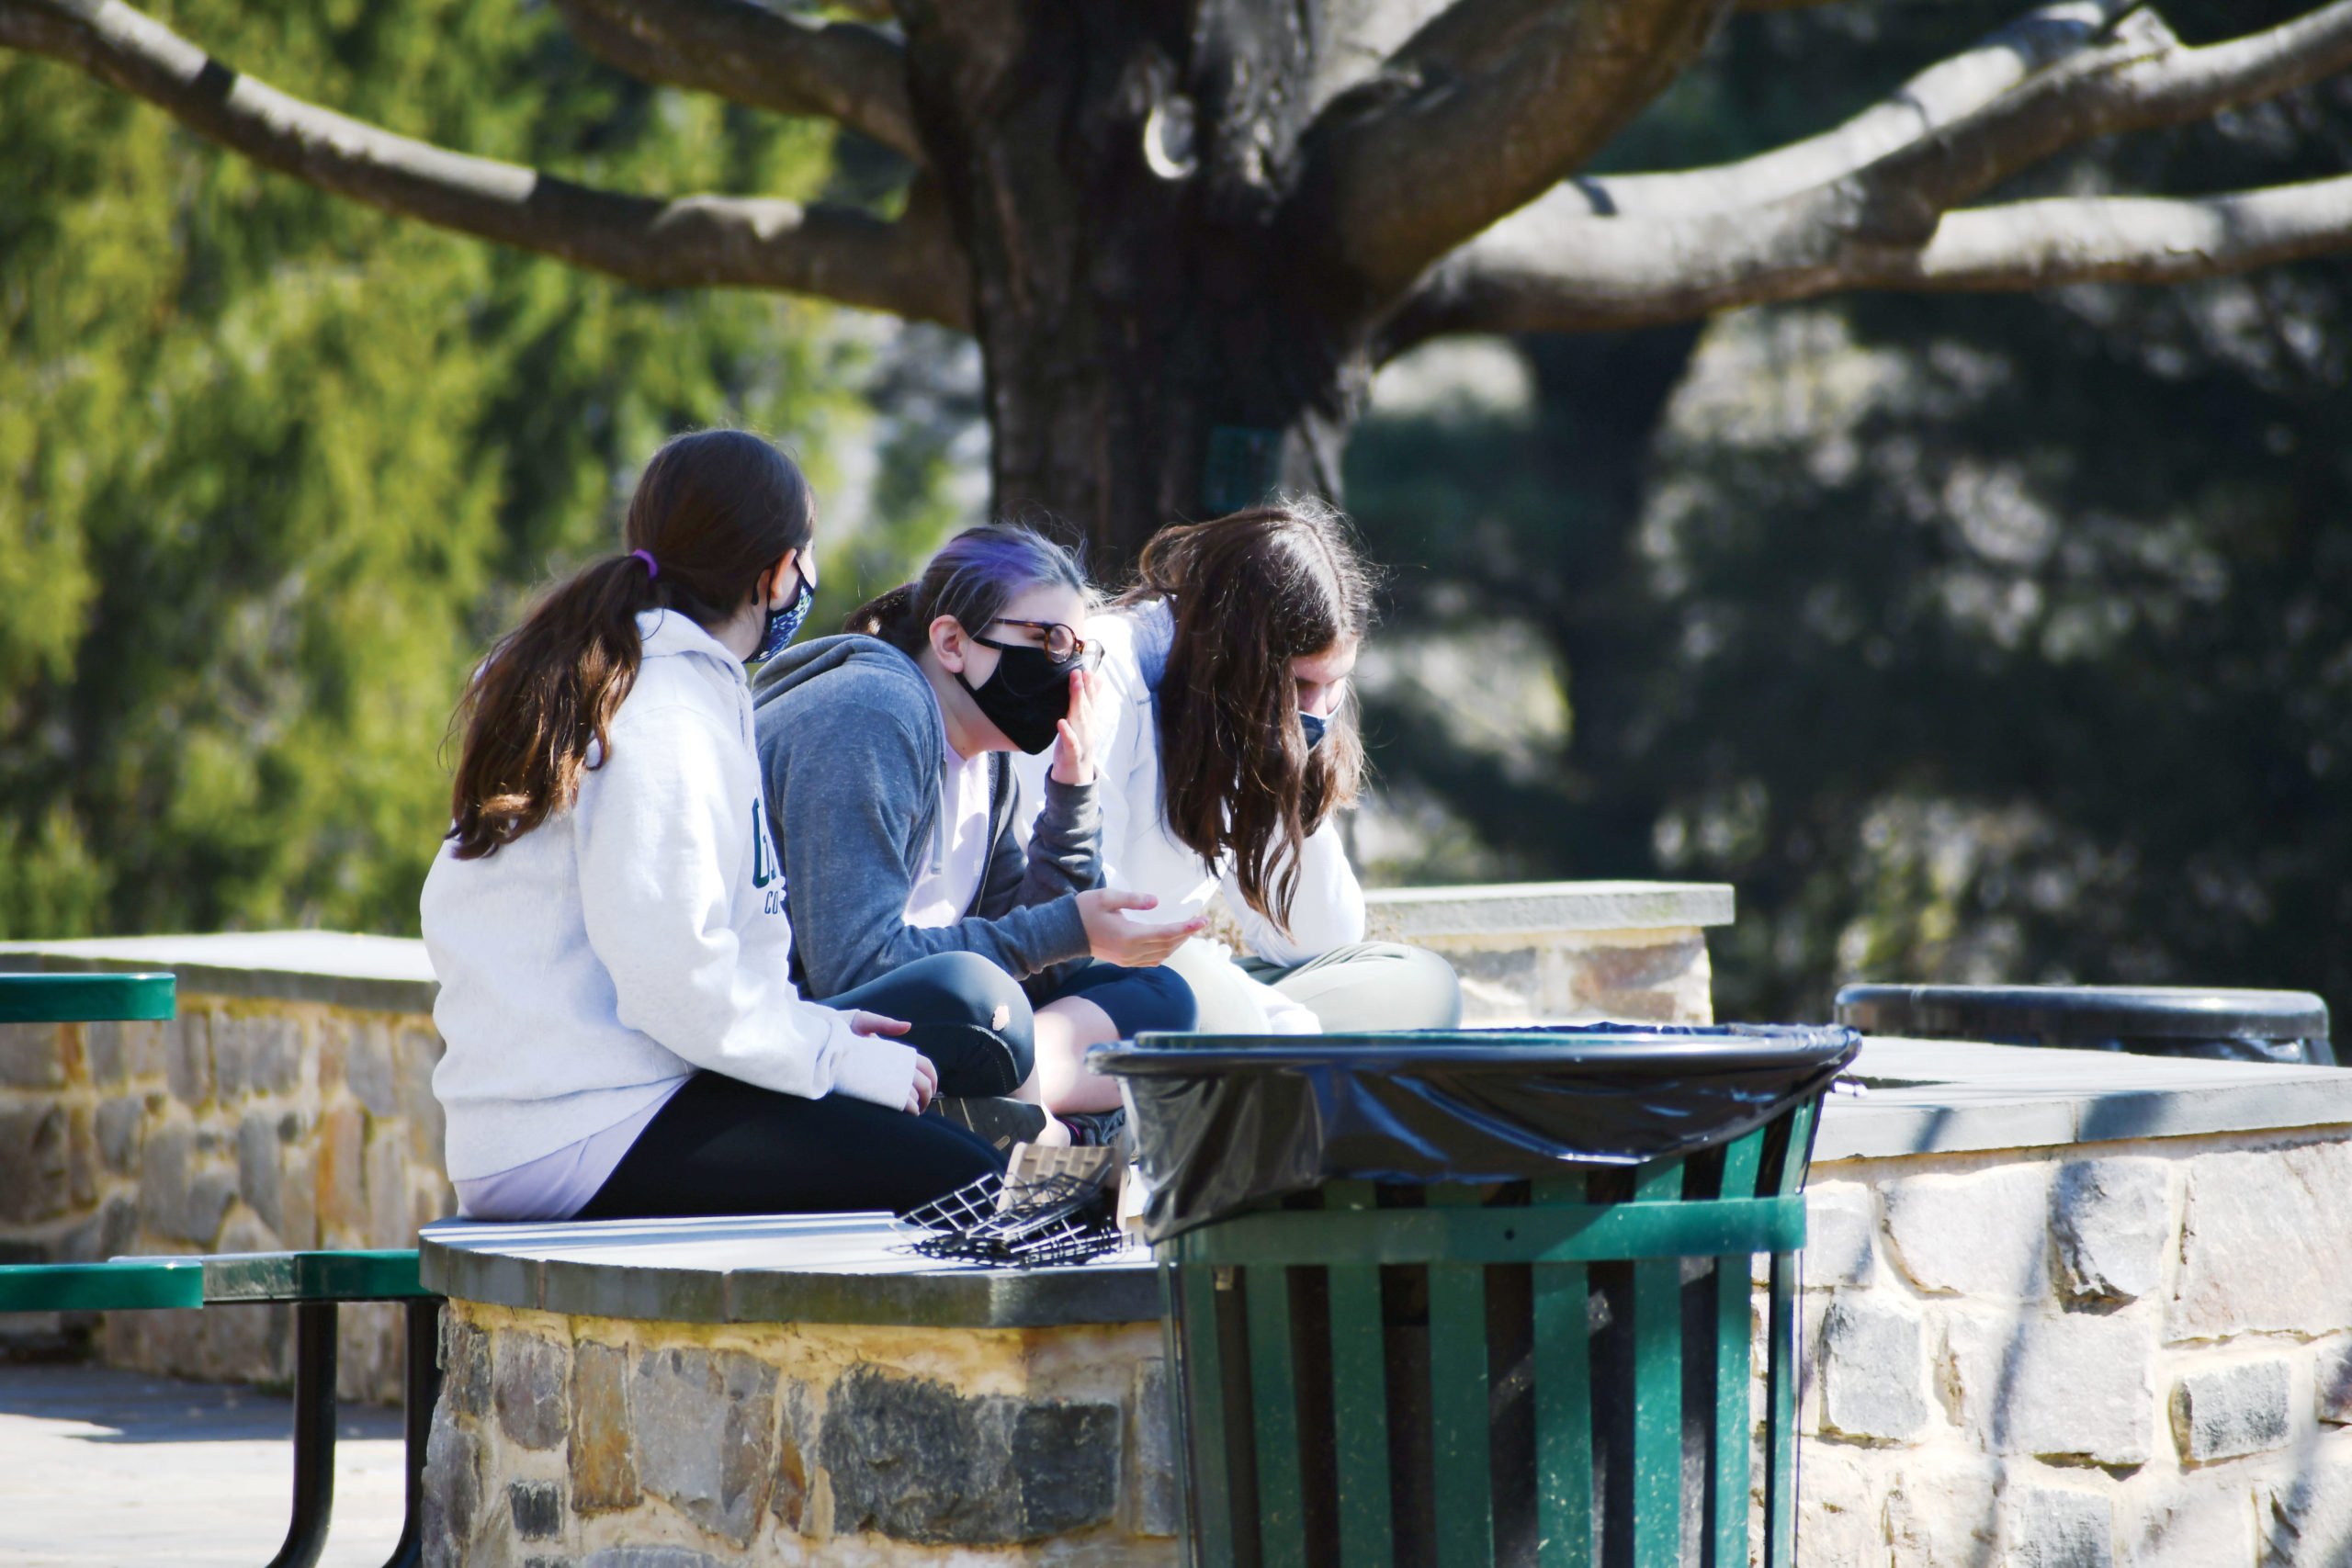 Three students sit on a stone wall under a tree.